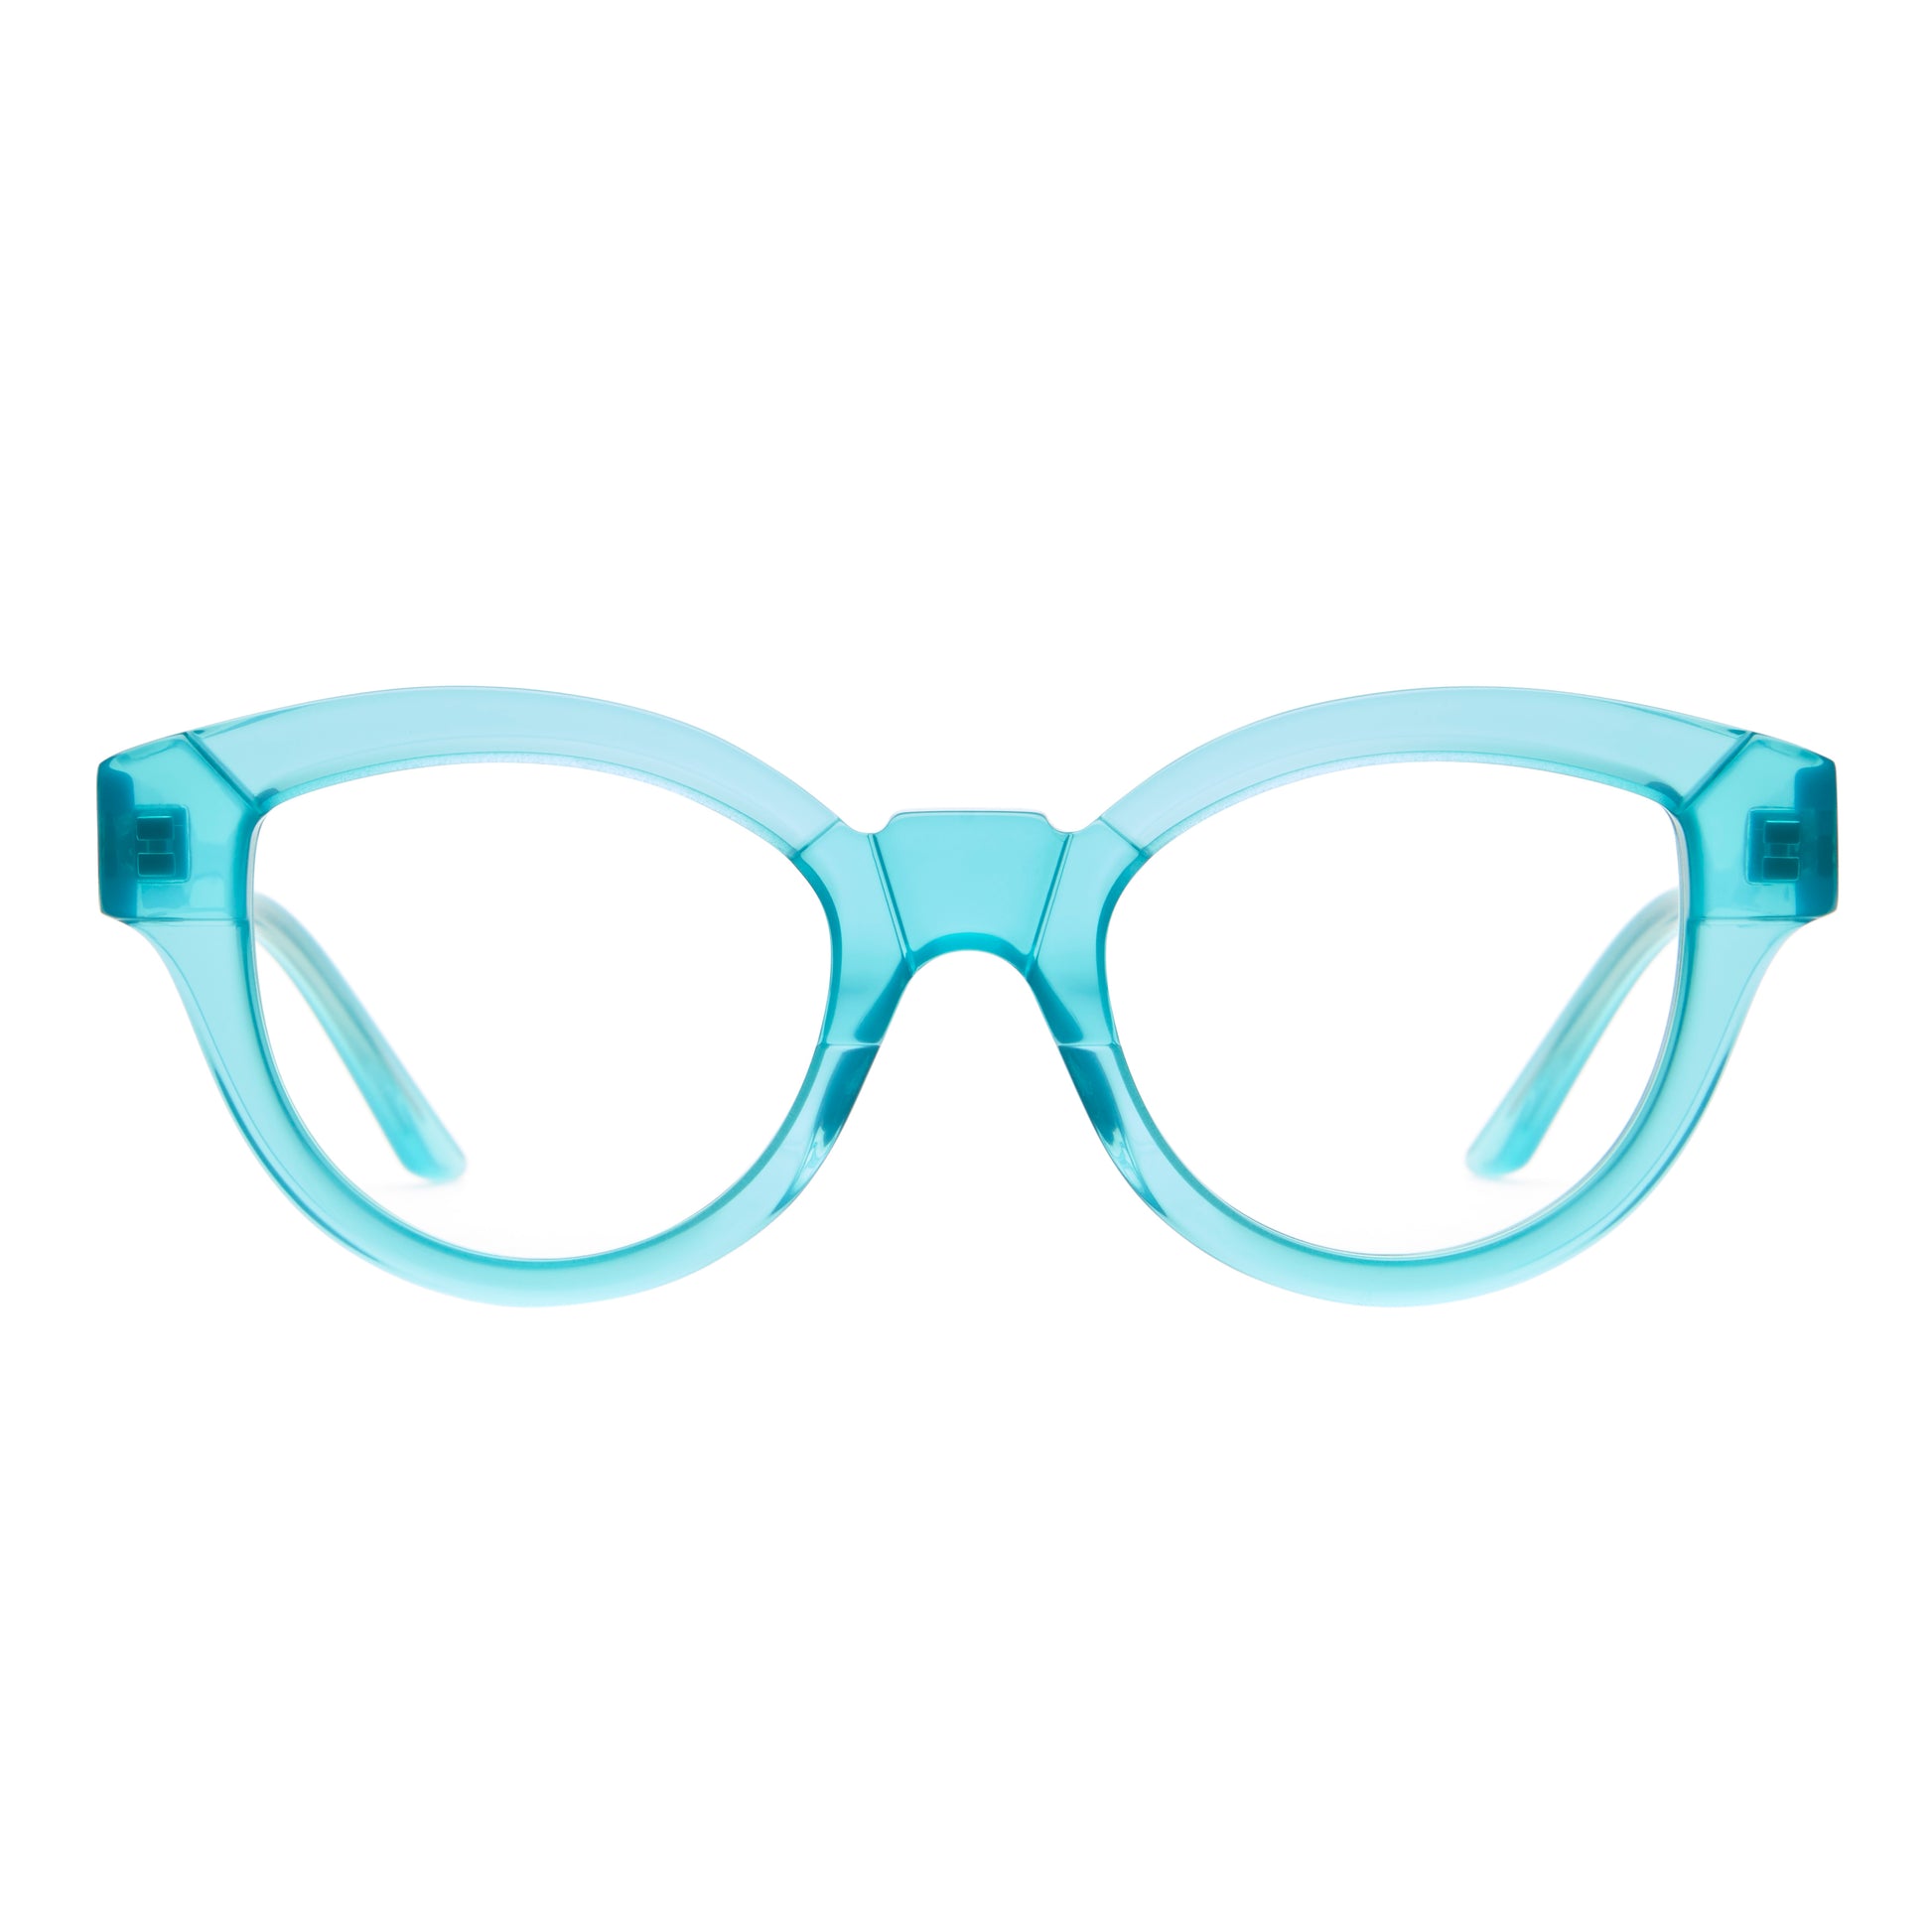 <p> Kuboraum MASKE K27 is a  Green Water; Acetate Optical Frame with a Avant Garde shape.  </p><p>Shop with confidence from Adair Eyewear, a Kuboraum Authorized Dealer.  We have provided the best in customer service and great designer eyewear for over 40 years. Visit https://adaireyewearonline.com</p>